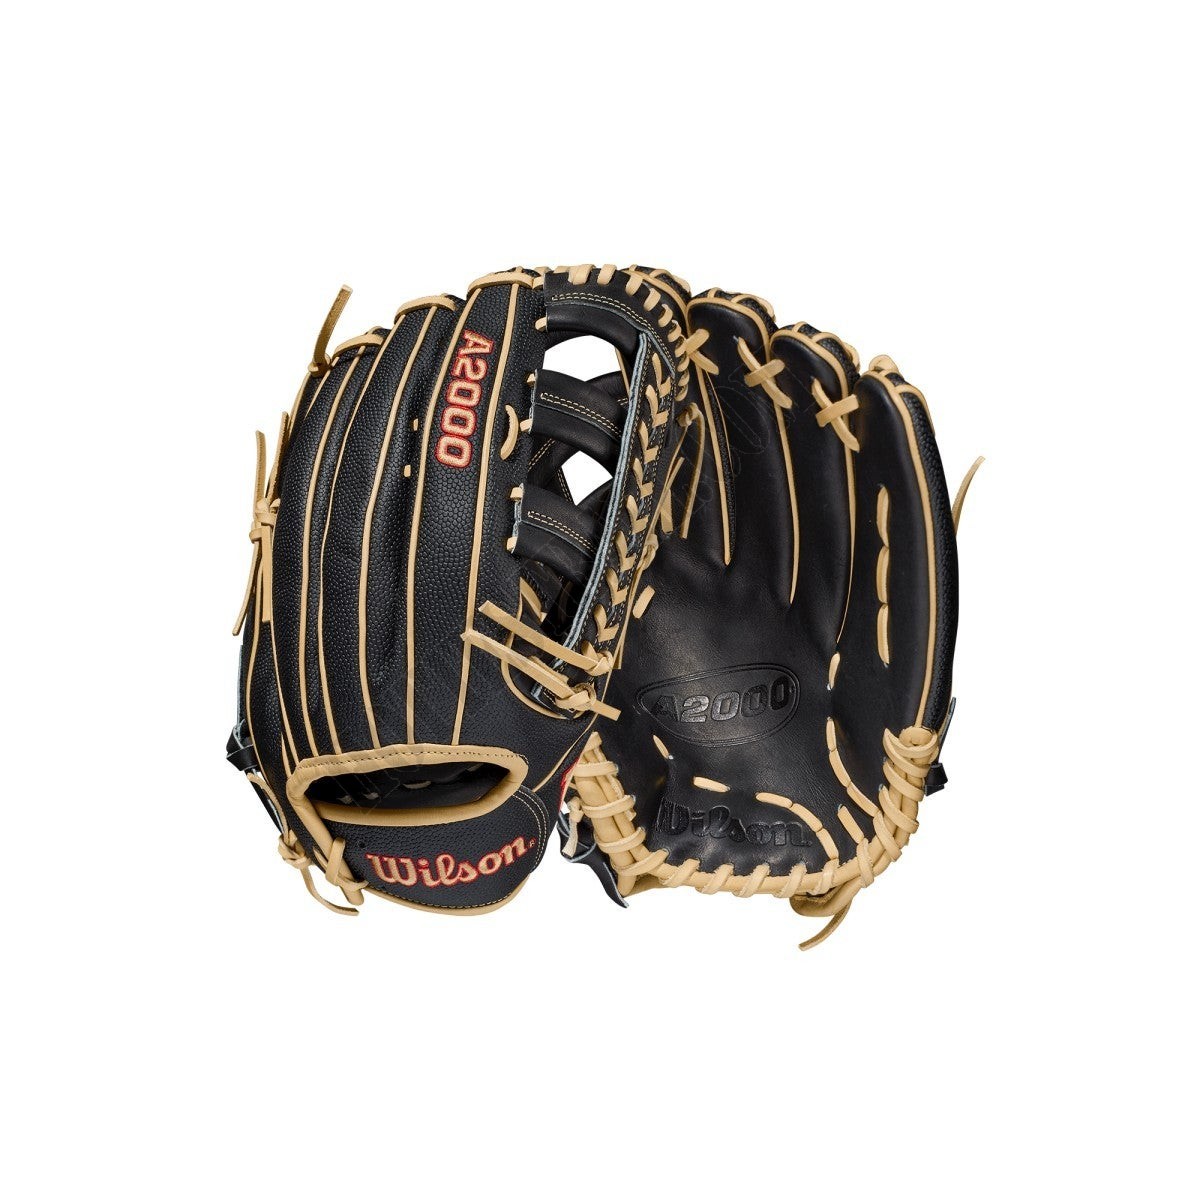 2021 A2000 1800SS 12.75" Outfield Baseball Glove ● Wilson Promotions - 2021 A2000 1800SS 12.75" Outfield Baseball Glove ● Wilson Promotions